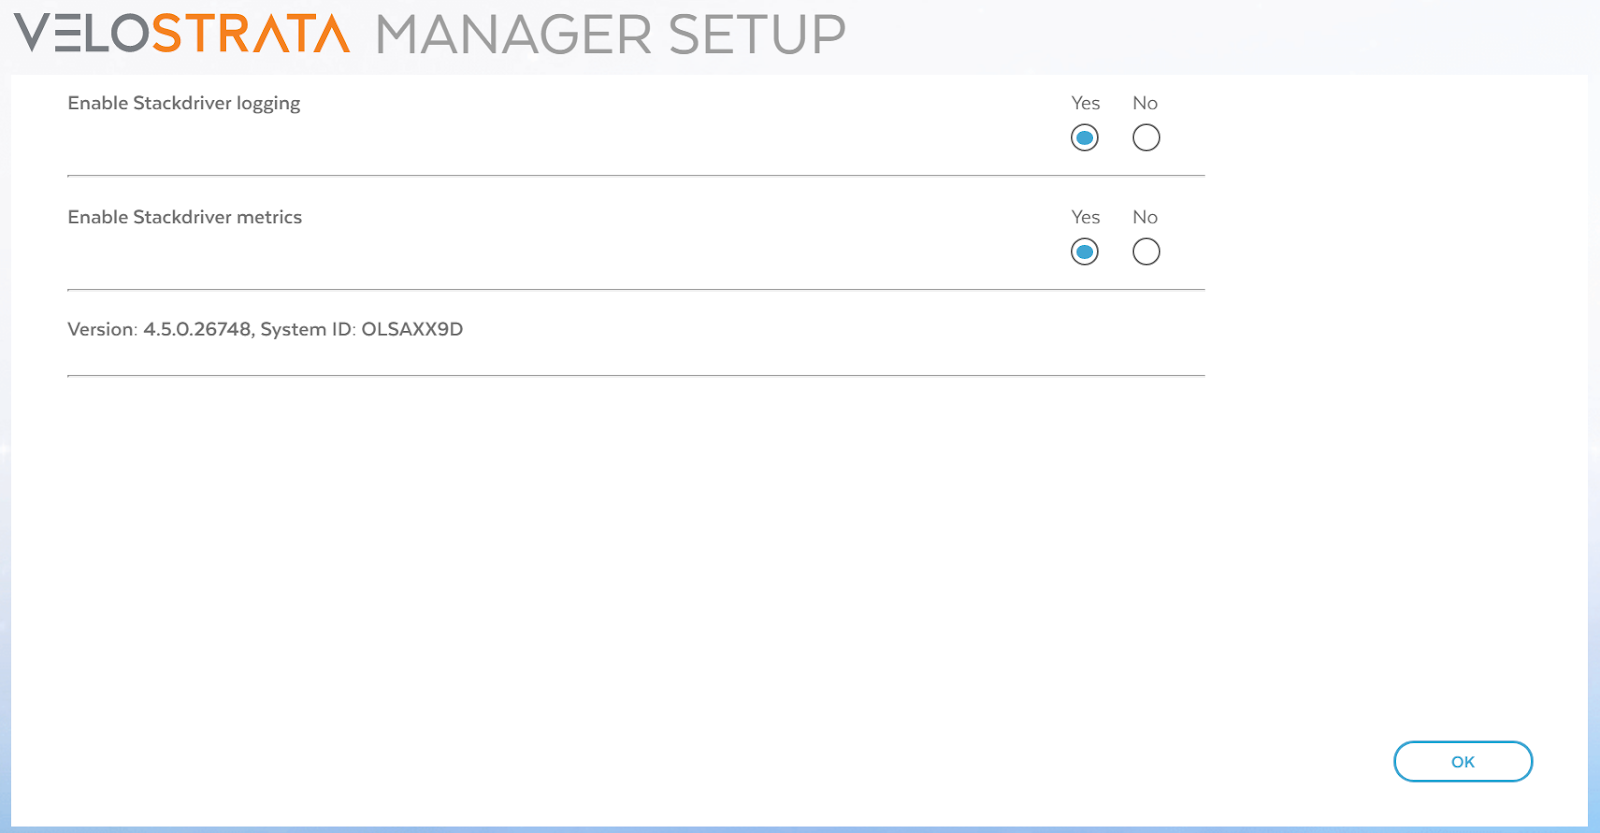 The Velostrata Manager Setup dialog box with the Enable Stackdriver logging and Enable Stackdriver metrics options enabled.